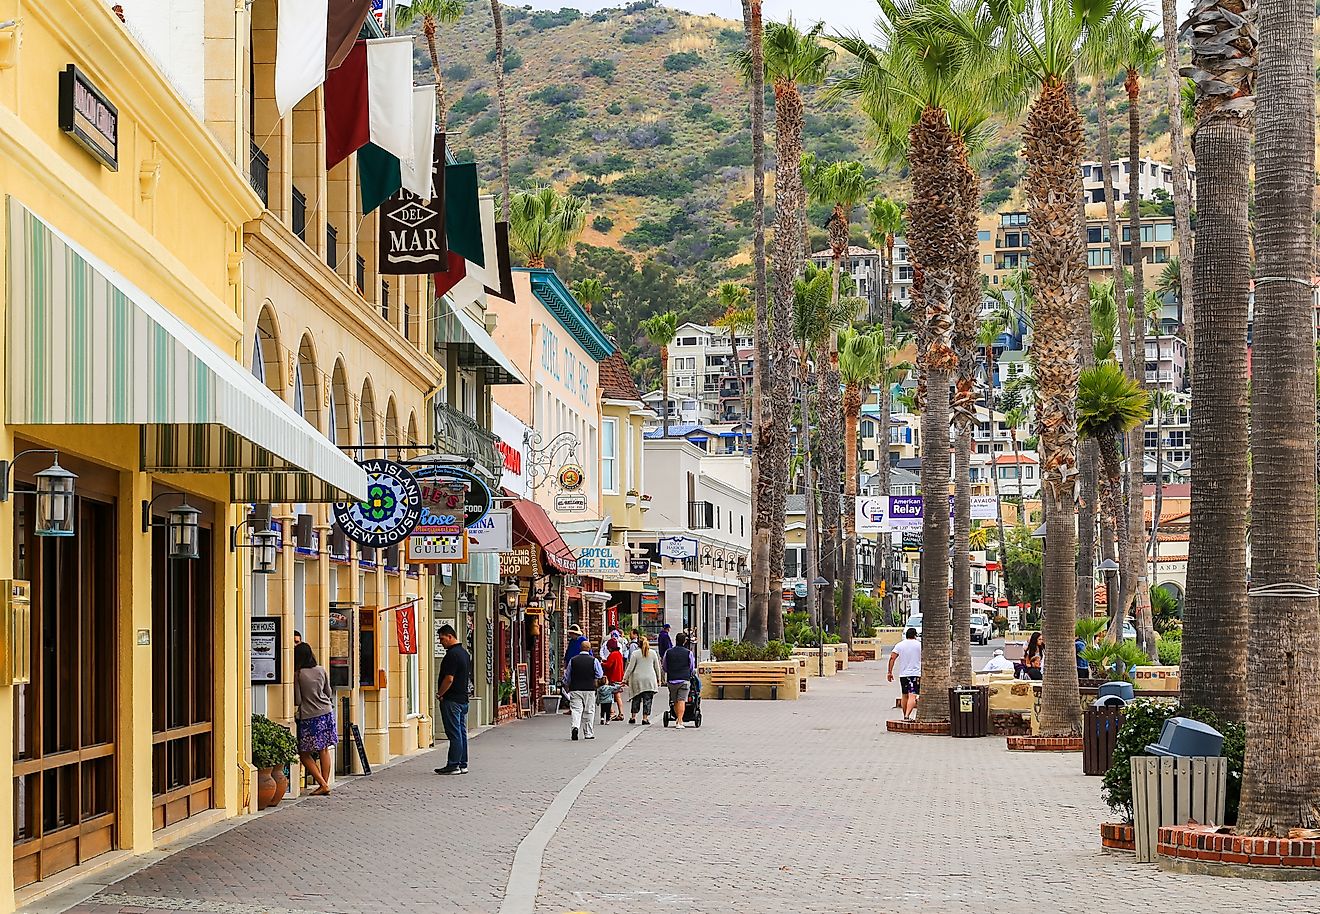 The boardwalk in Avalon (Santa Catalina Island) with shops on the left. People strolling around. In the background are houses in the hills.